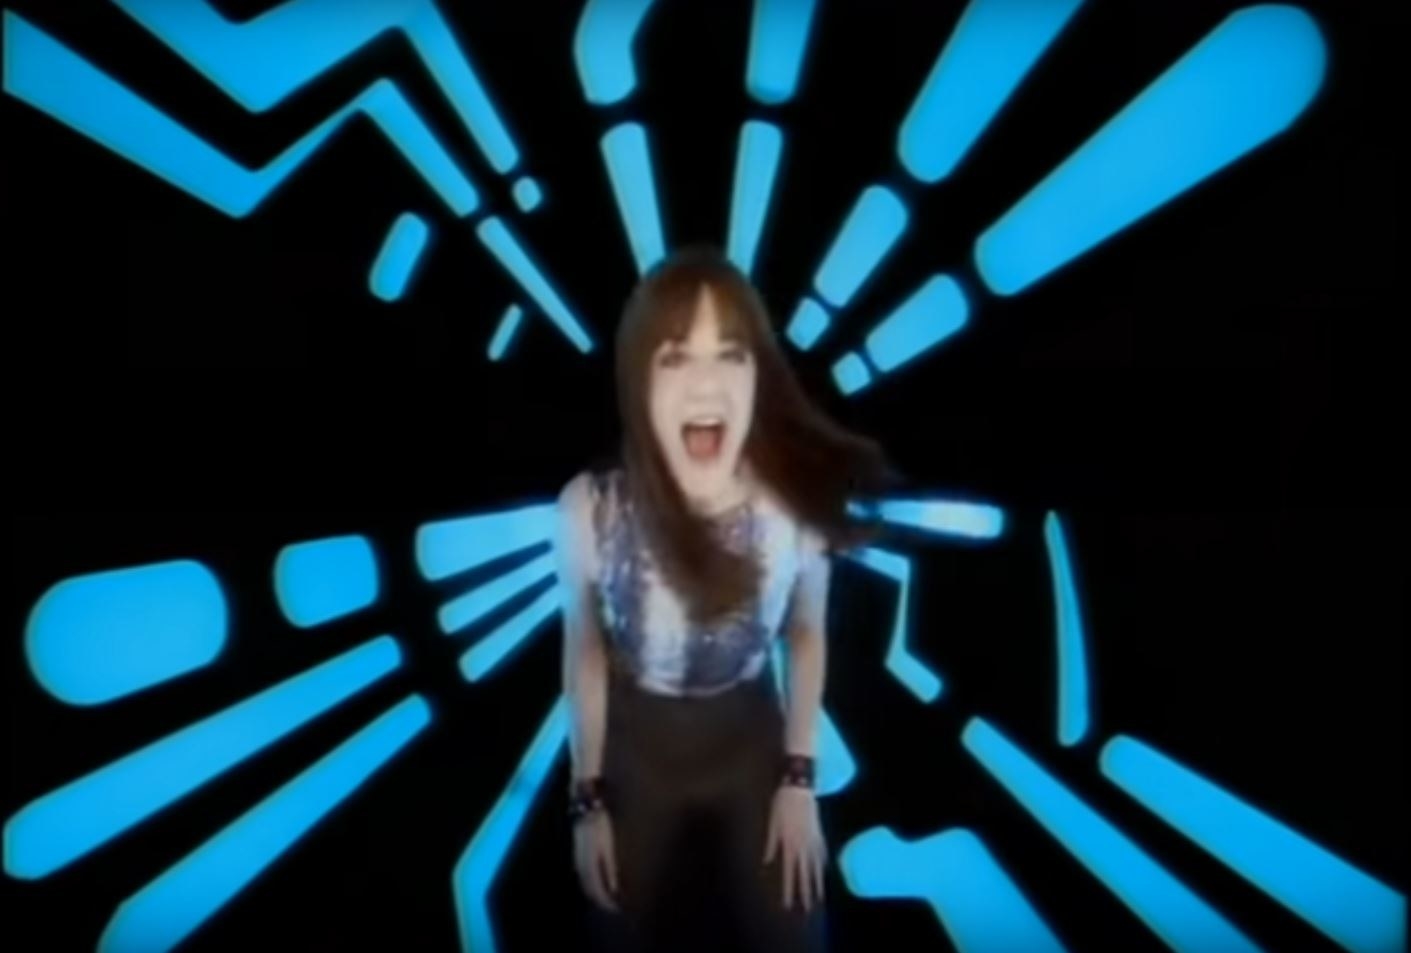 Vanessa Amorosi singing into a blue and black void, similar in style to the movie Tron